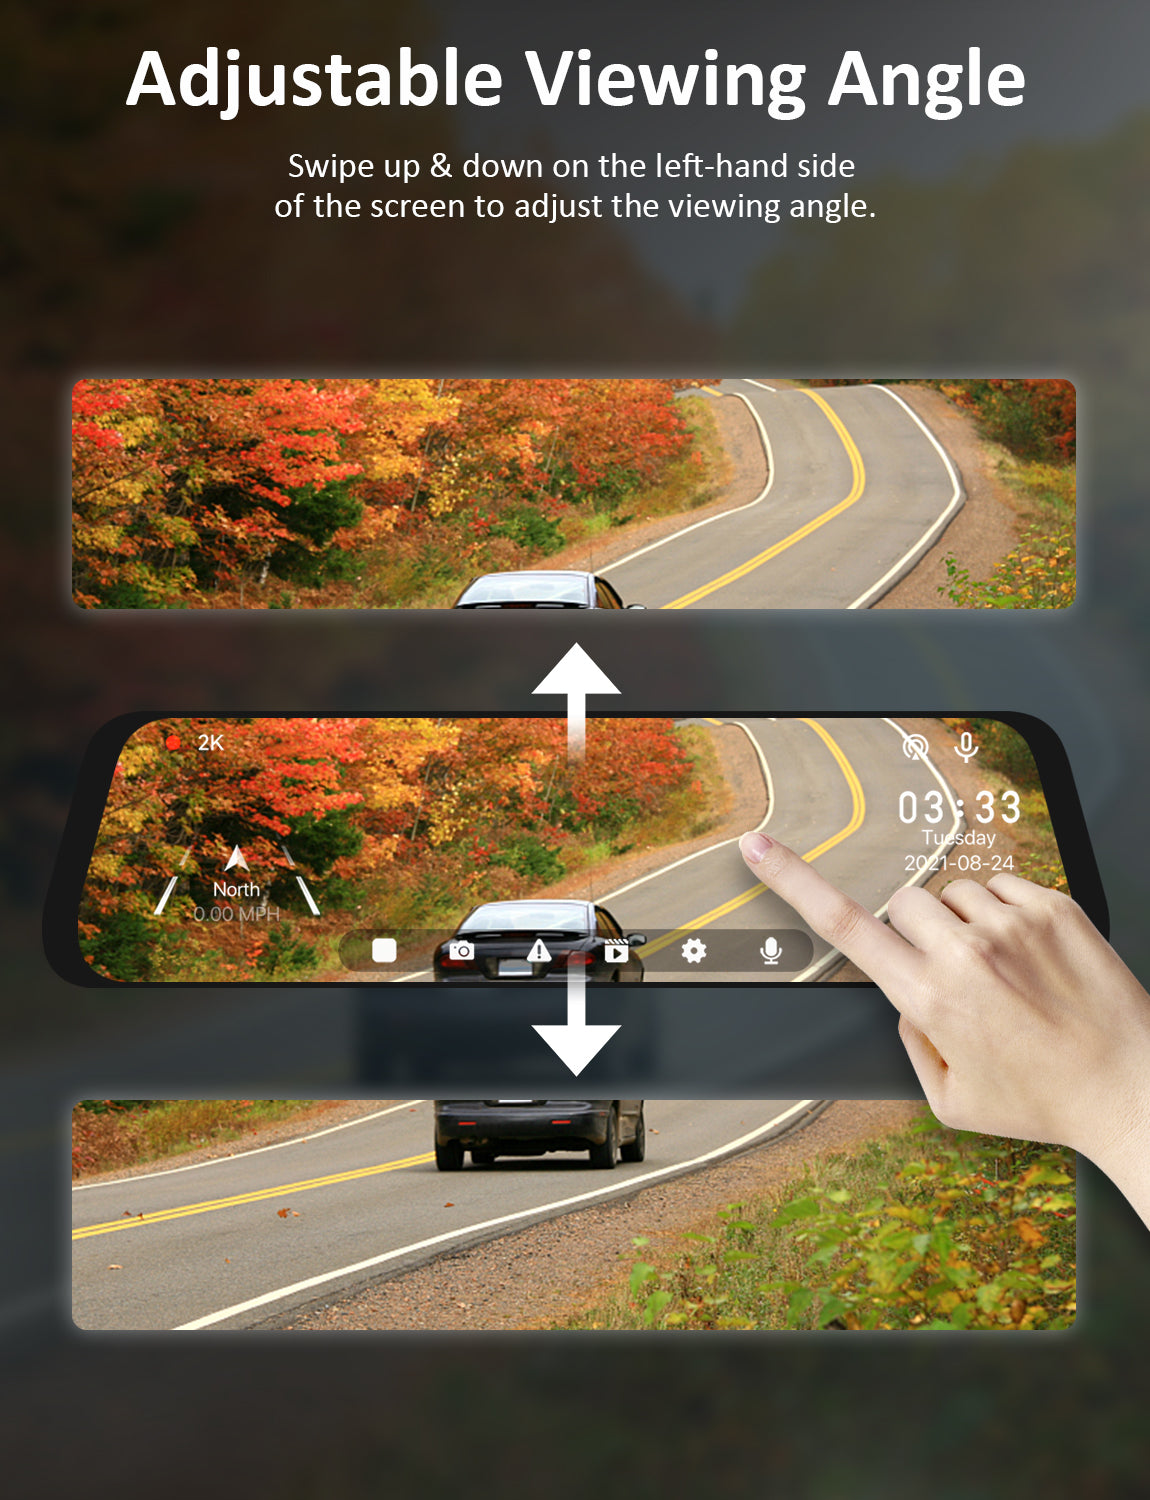 Users can adjust the view angle of the dash cam by swiping up and down on the screen with hands.